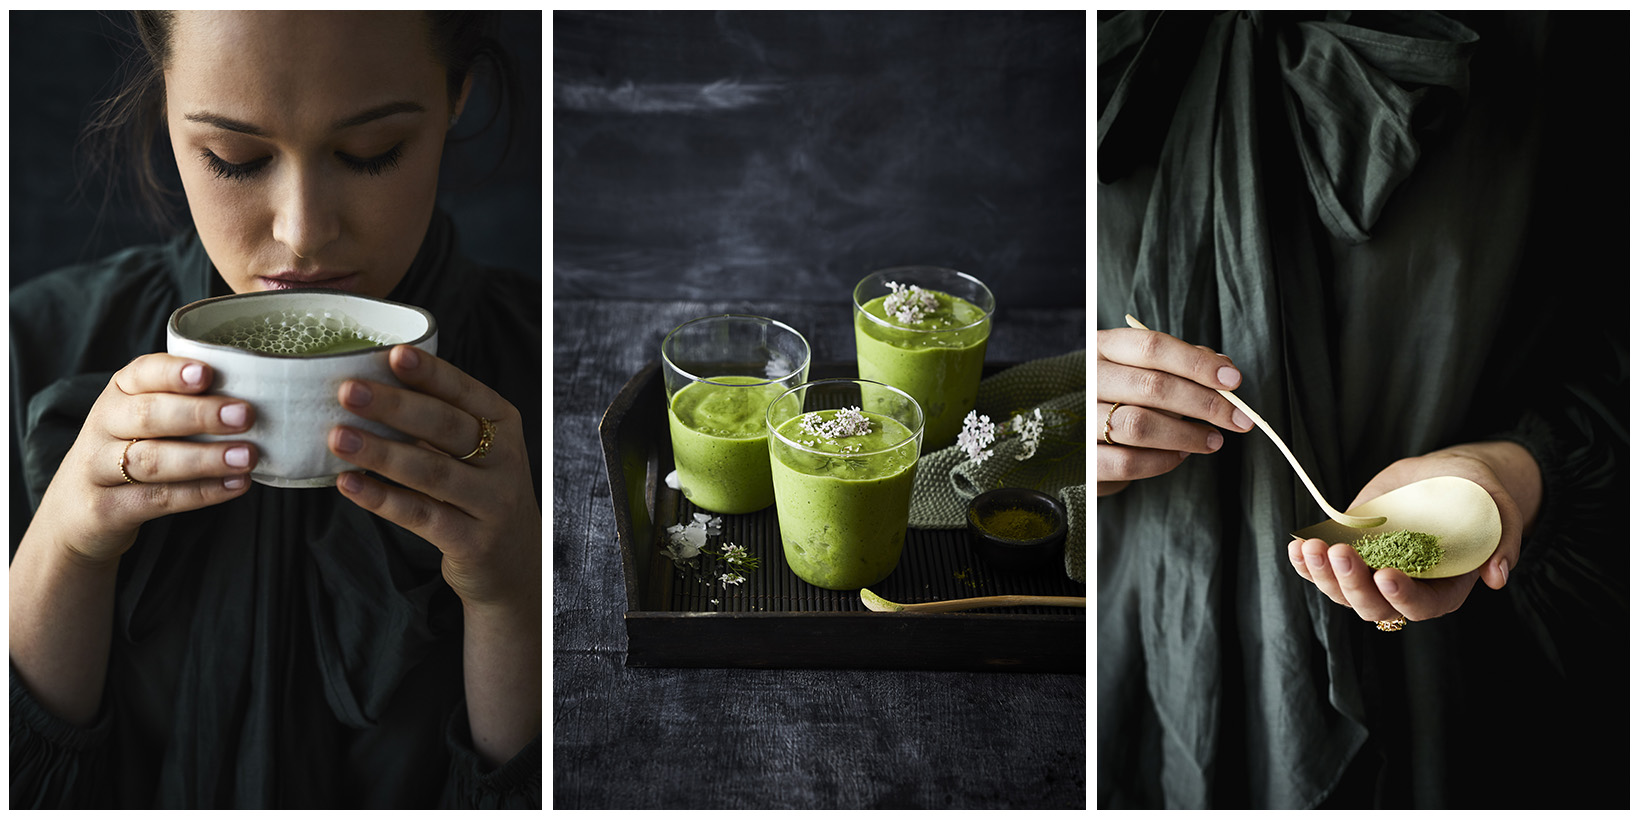 Matcha Tea by Storm & India・Editorial & Advertising Food Photography